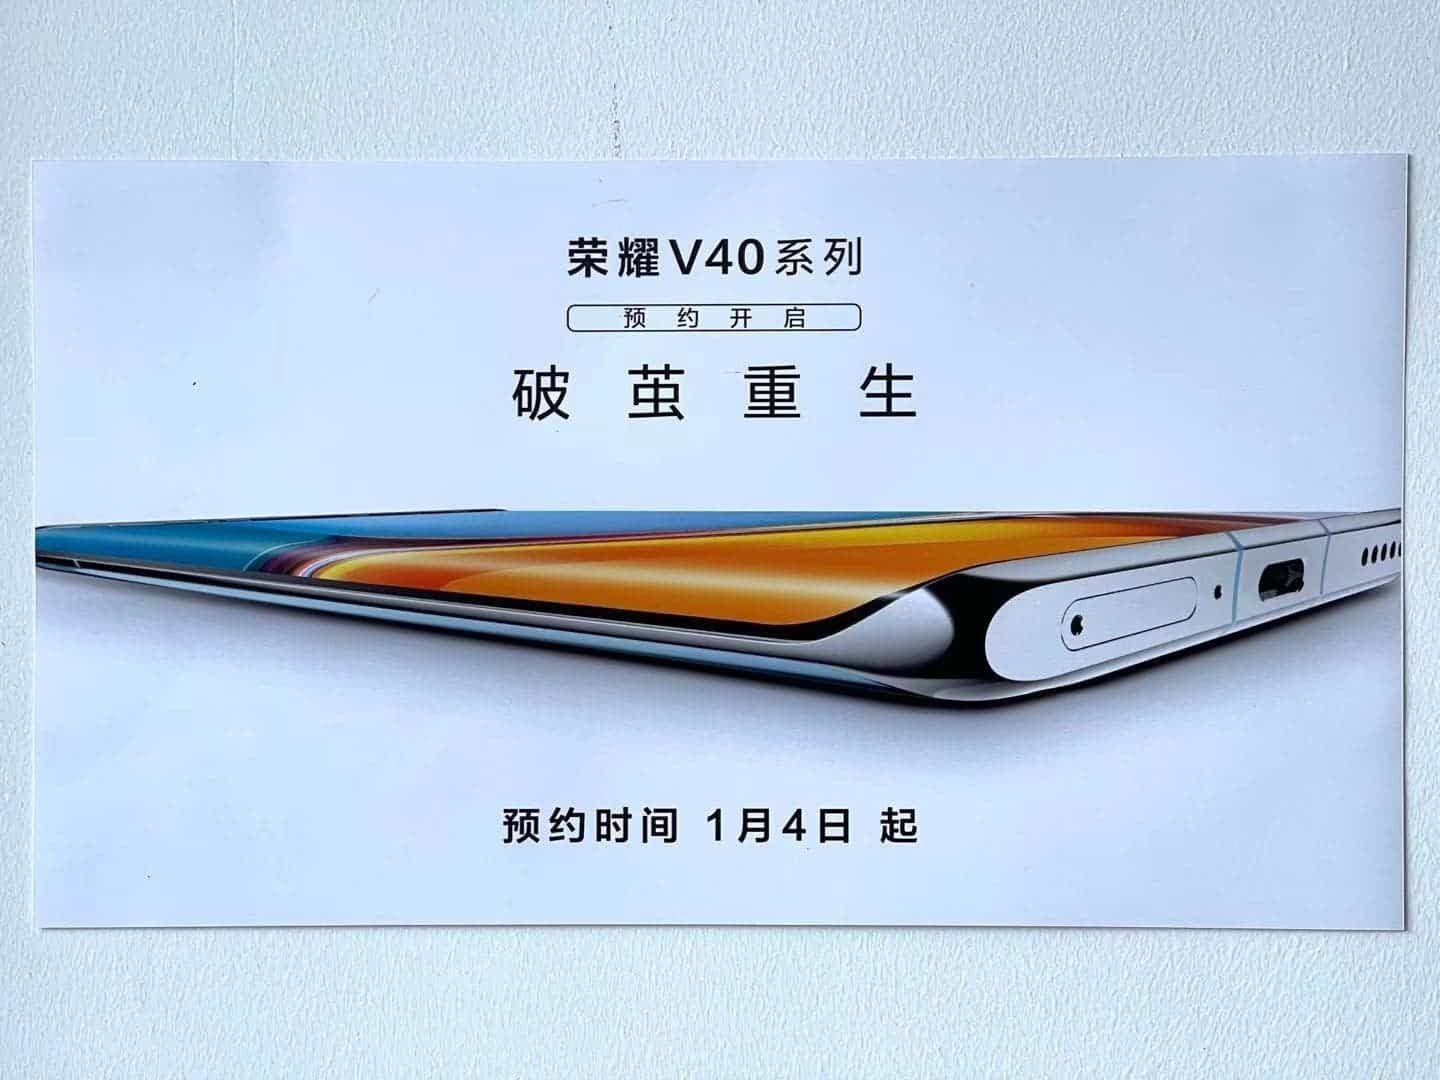 Honor V40 Technical Specifications Leaked